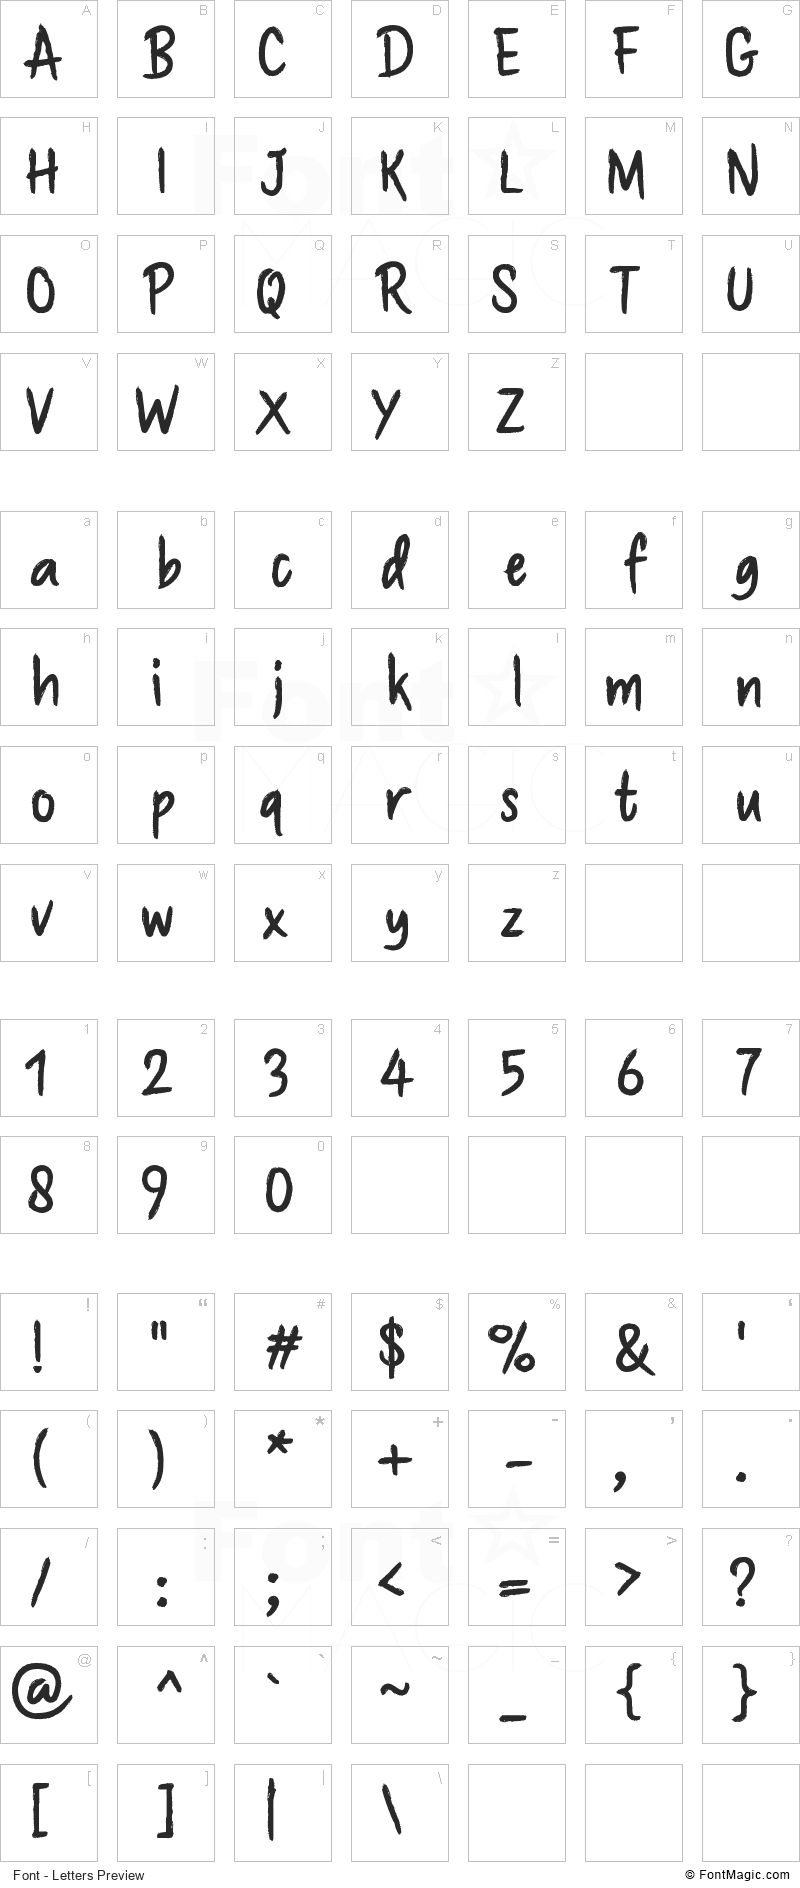 Brushaff Font - All Latters Preview Chart